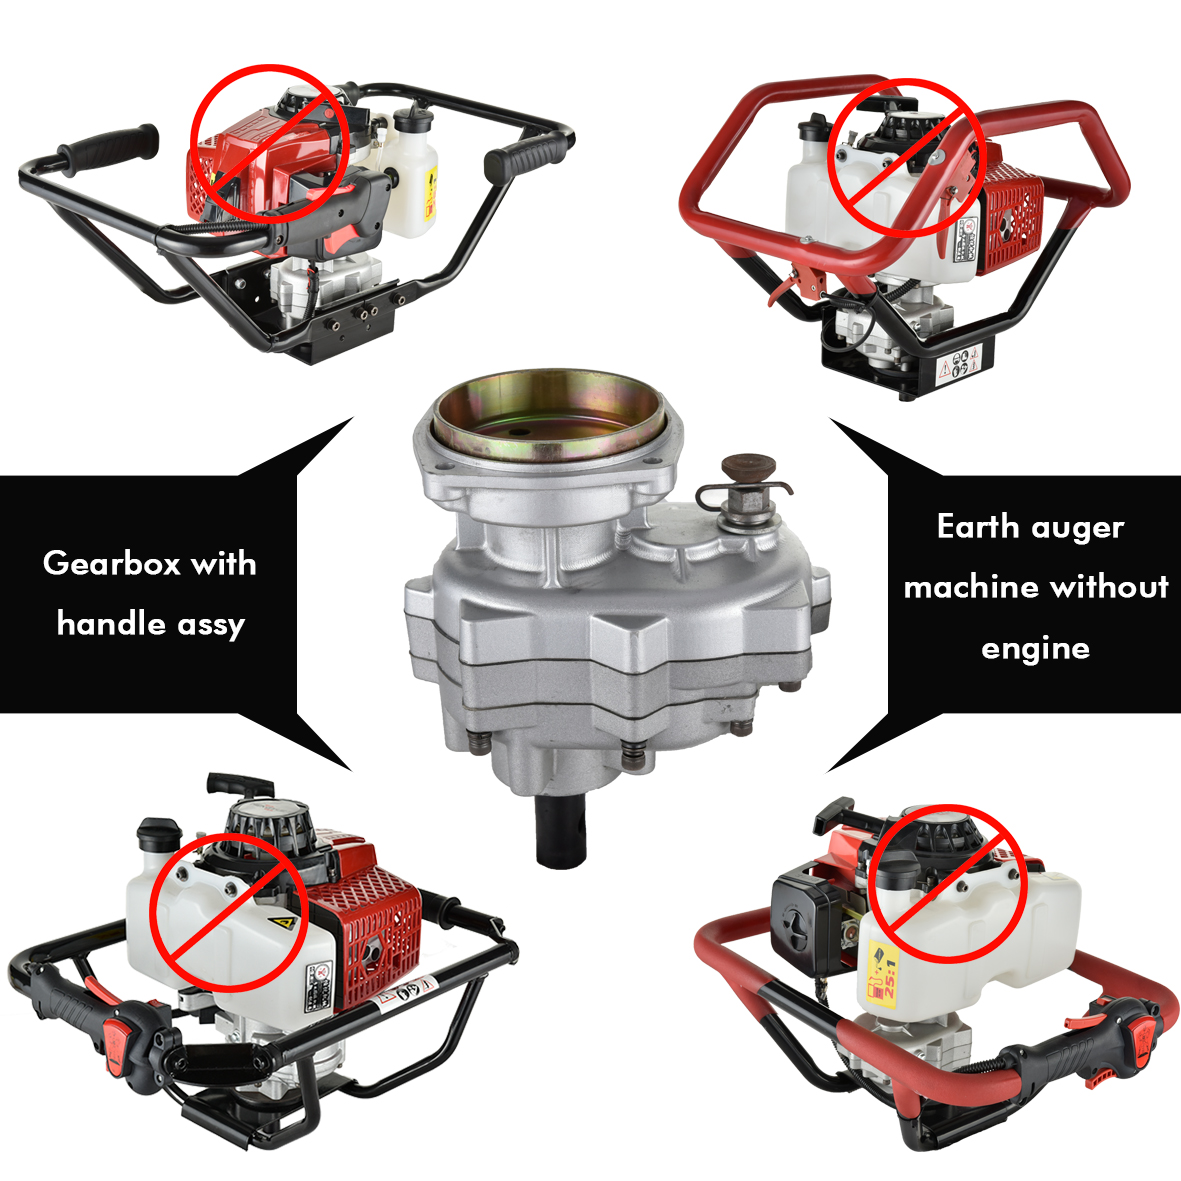 Manual Reverse Gear Box for Small 4 Or 2 Stroke Gasoline Engine Power Earth Auger Machine